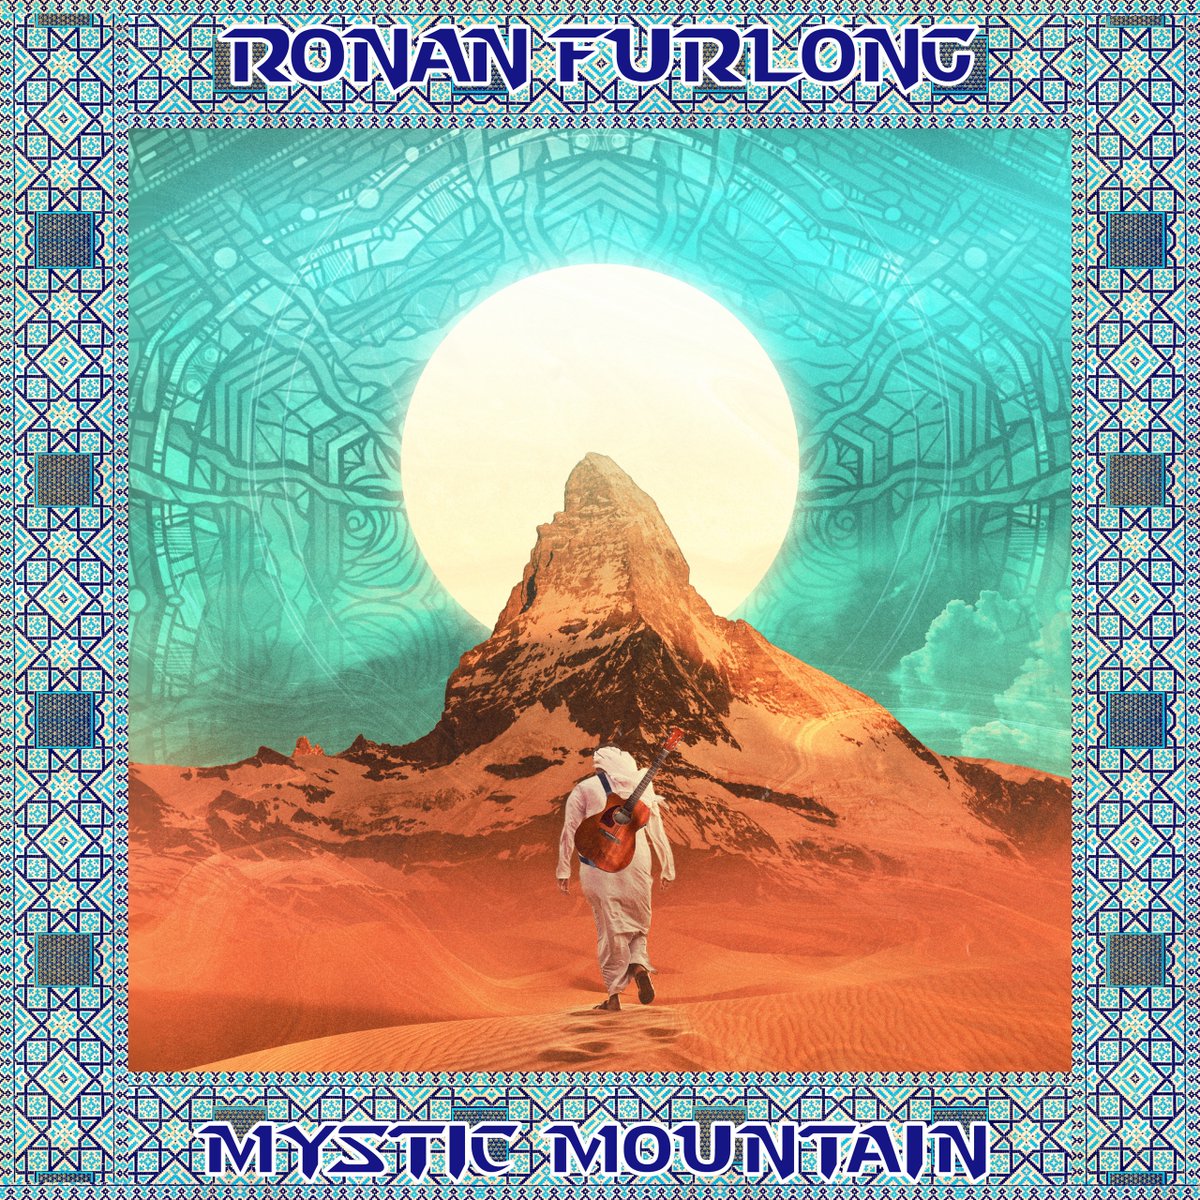 #ForSale @rfurlongmusic music available on amazon amzn.to/3u8esd1, Apple Music apple.co/3lTfo0G, and Spotify spoti.fi/3b0H5Rx. New single ‘Mystic Mountain’ released on 2nd April! #Music #promotion